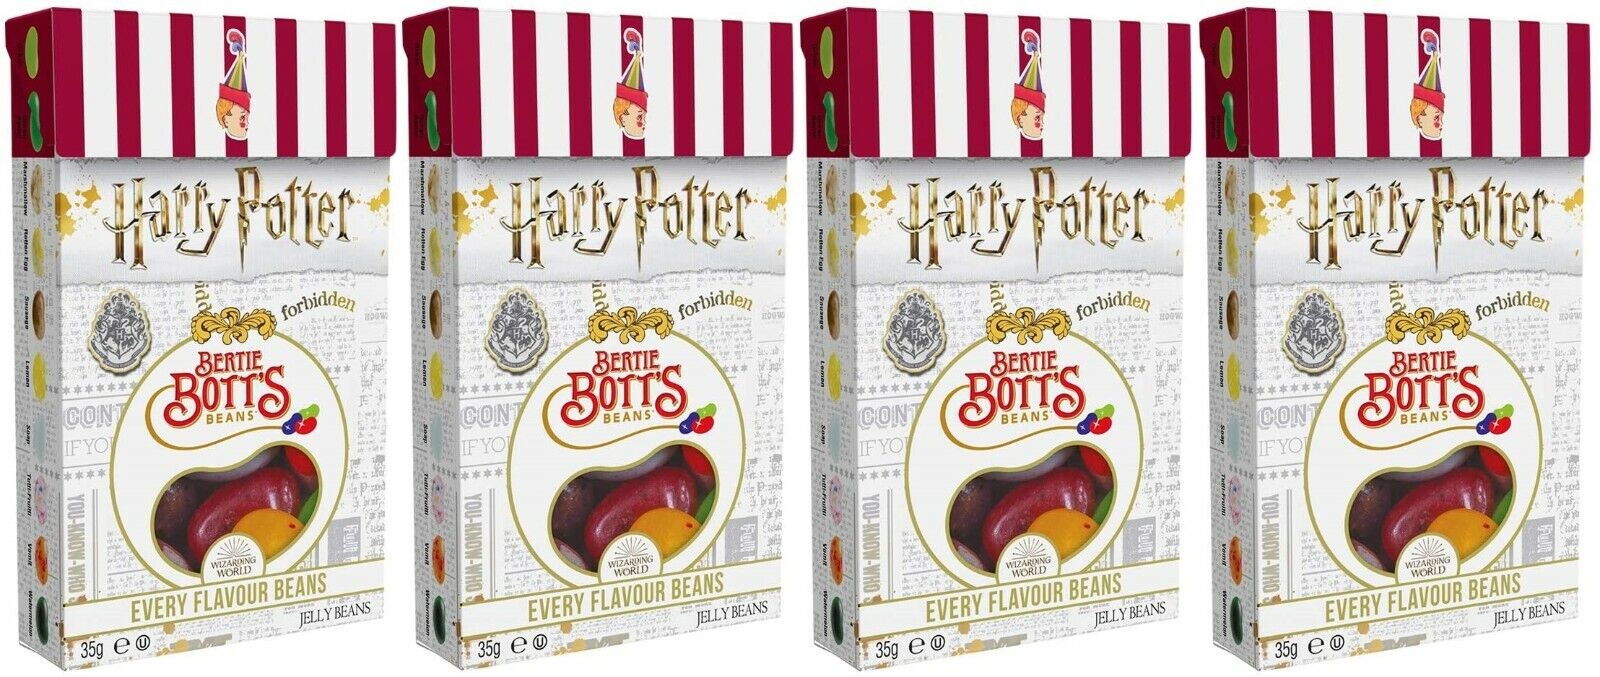 4x Jelly Belly Harry Potter Bertie Botts Flavour Beans 35g American Sweets